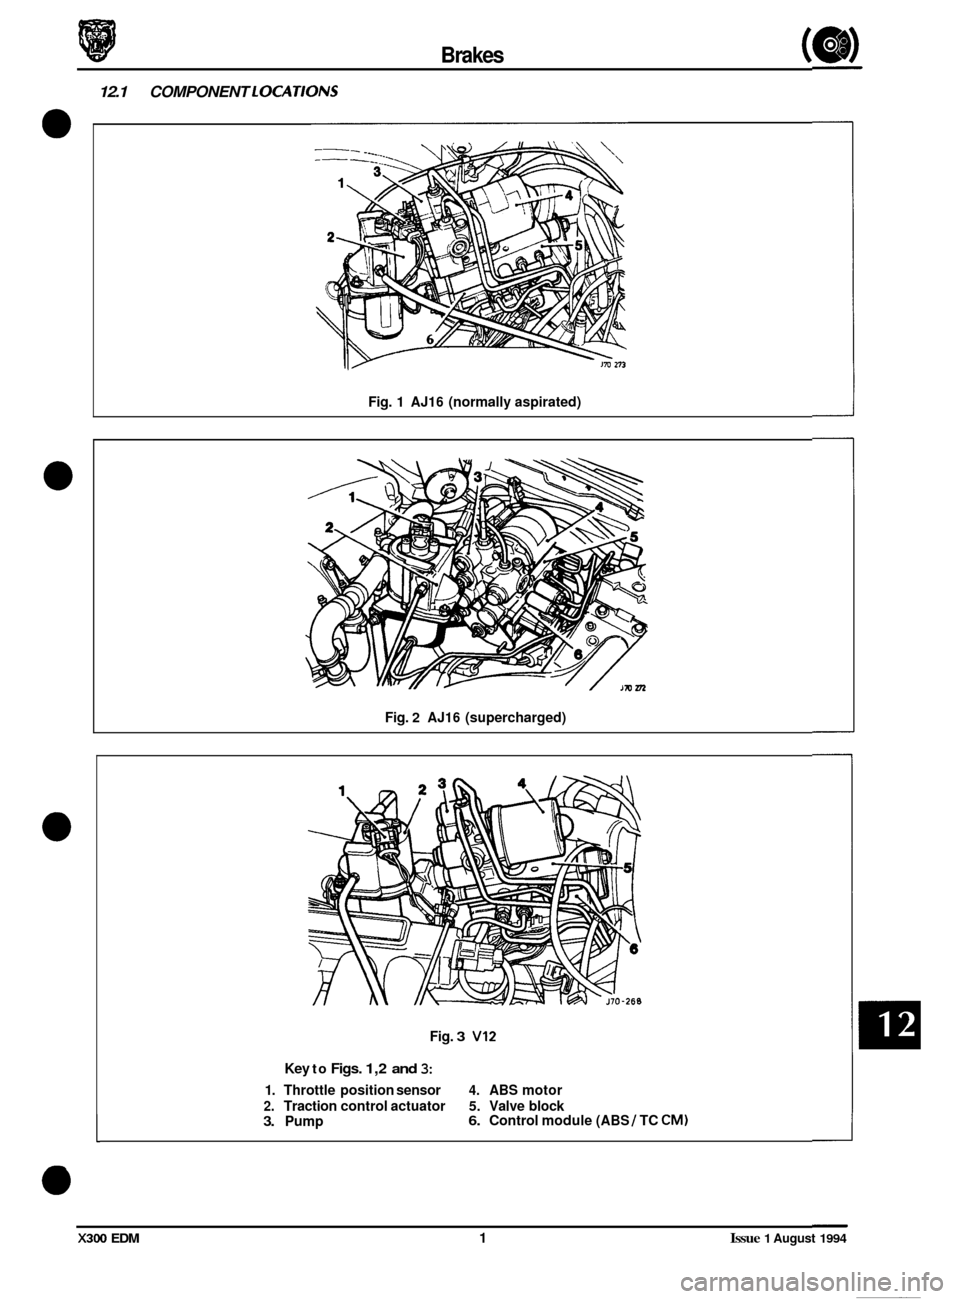 JAGUAR XJ6 1994 2.G Electrical Diagnostic Manual 0 
0 
0 
Brakes ( 
12.1 COMPONENT LOCATlONS 
Fig. 1  AJ16 (normally aspirated) 
Fig. 
2 AJ16 (supercharged) 
Fig. 
3 VI2 
Key to Figs. 1,2 and 3: 
1. Throttle  position  sensor 4. ABS motor 
2. Tracti